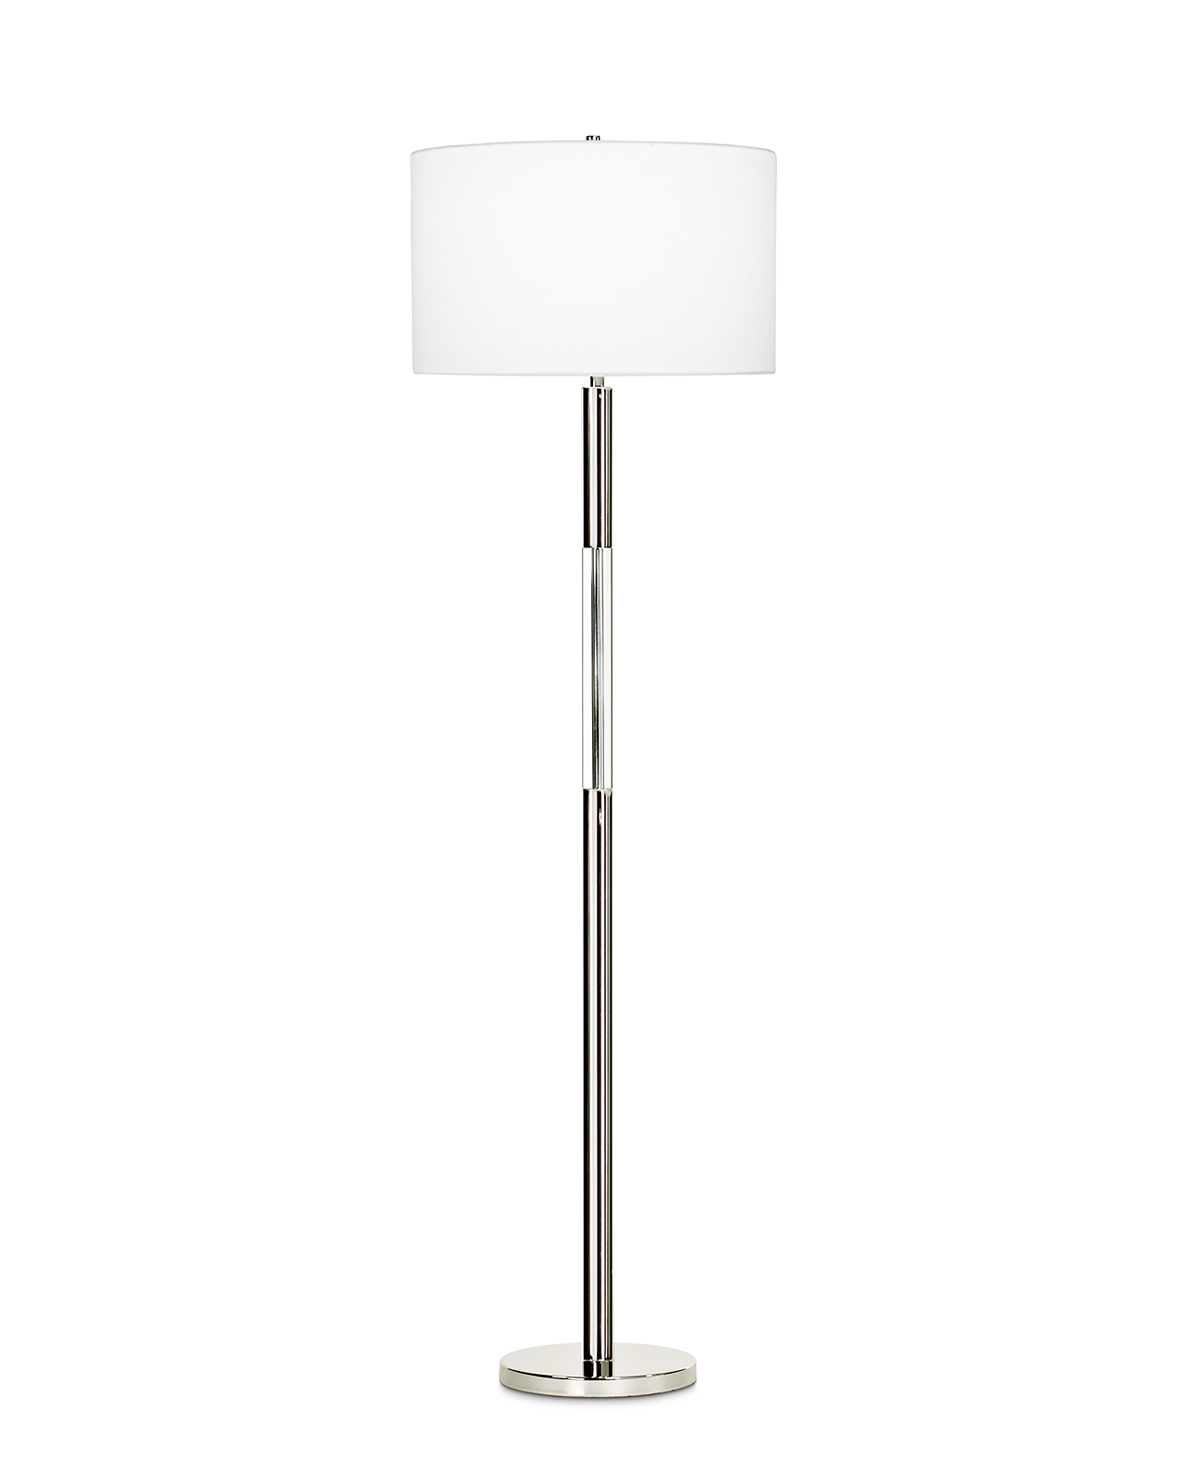 FlowDecor Poppy Floor Lamp in metal with polished nickel finish and crystal and white linen drum shade (# 3719)